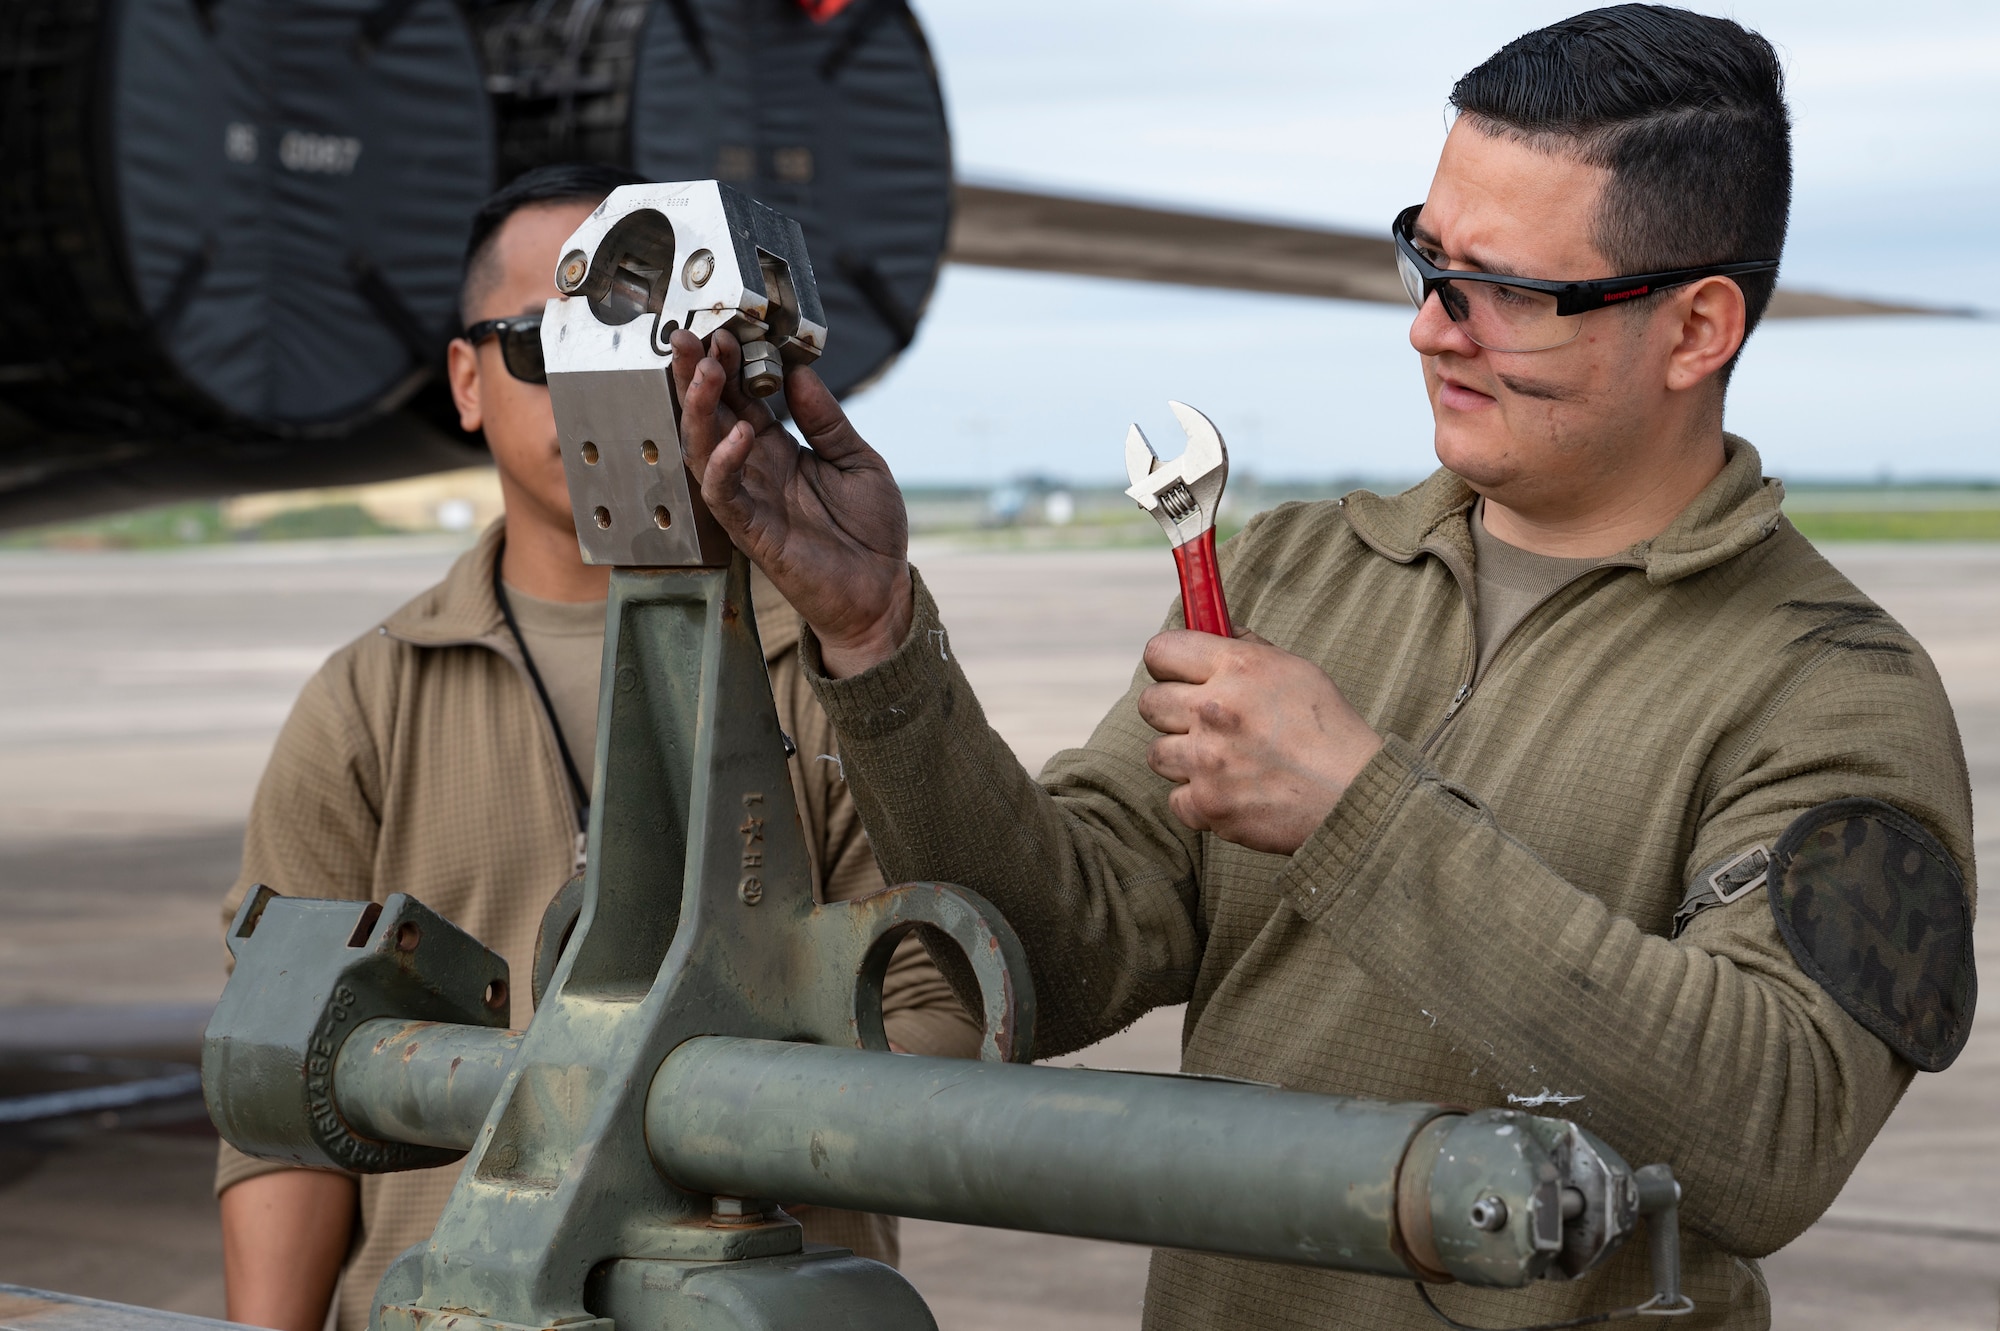 U.S. Air Force Senior Airman Alex Ortiz-Nunez, 9th Expeditionary Bomb Squadron aerospace propulsion specialist, completes an engine swap on a B-1B Lancer at Morón Air Base, Spain, April 3, 2024, during Bomber Task Force Europe. Regular and routine deployments of strategic bombers provide the U.S. with critical skills to train and operate alongside Allies and partners while bolstering collective response to global conflict. (U.S. Air Force photo by Airman 1st Class Emma Anderson)